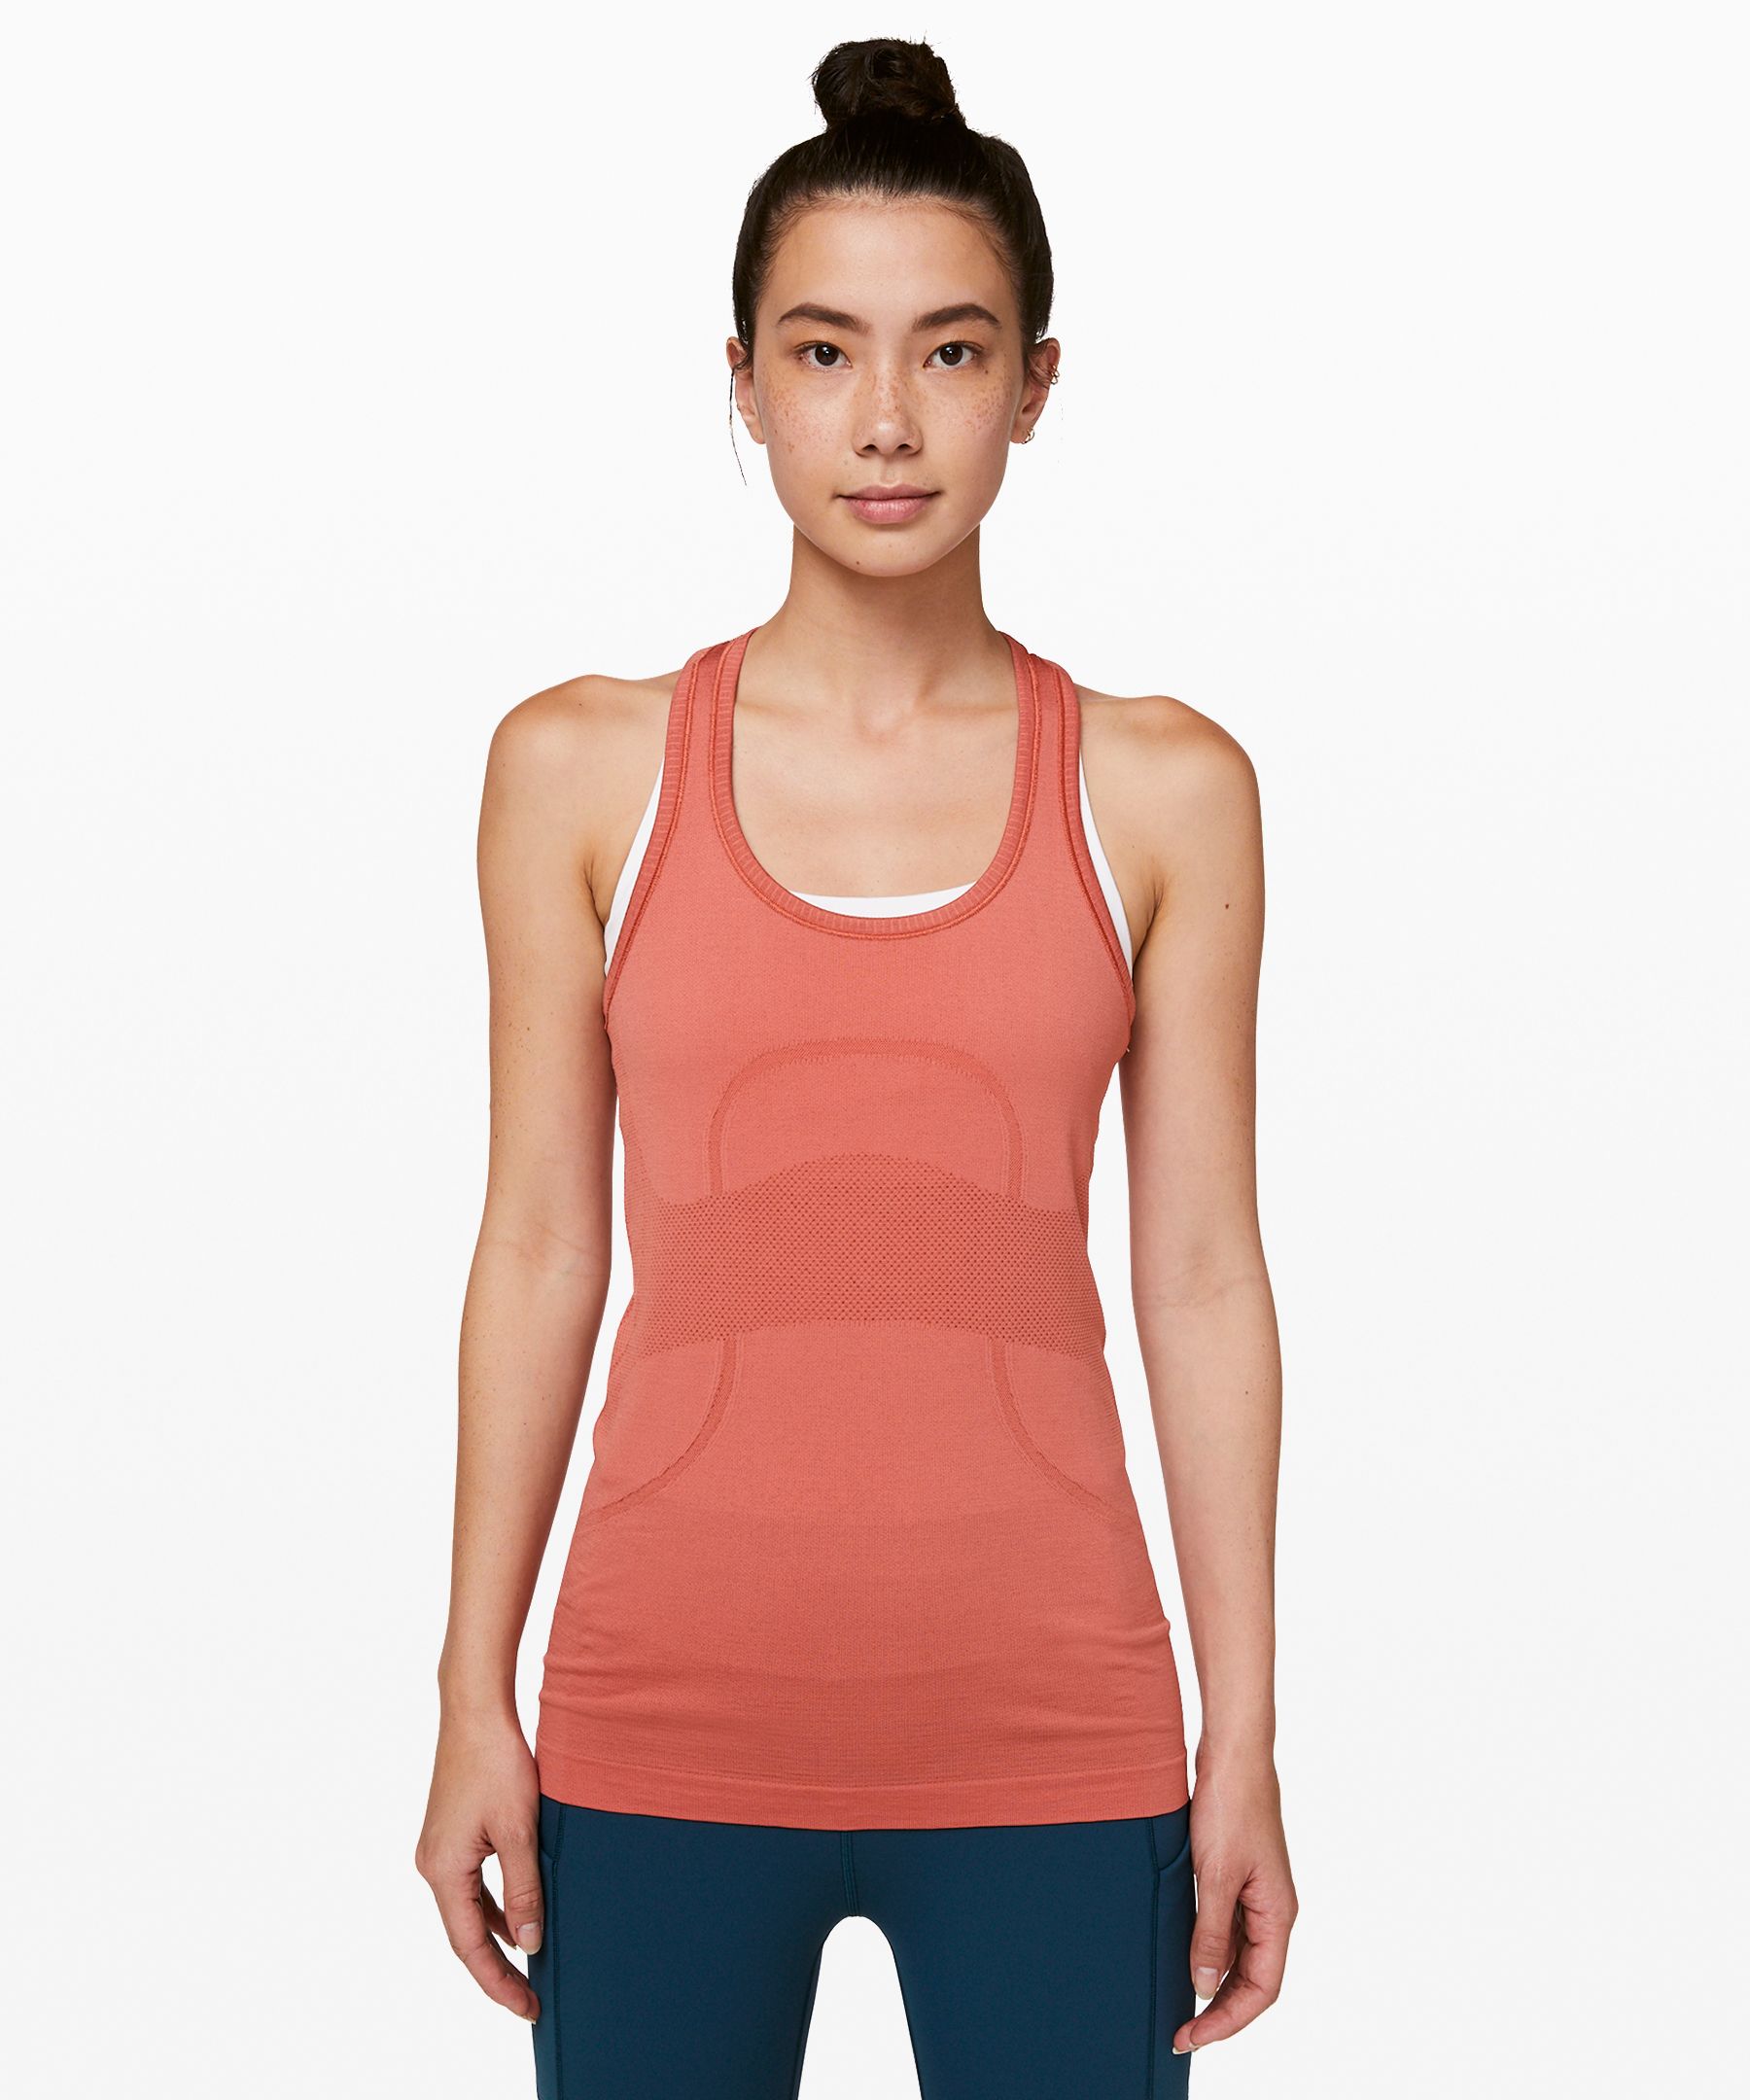 Lululemon Swiftly Tech Racerback In Rustic Coral/rustic Coral